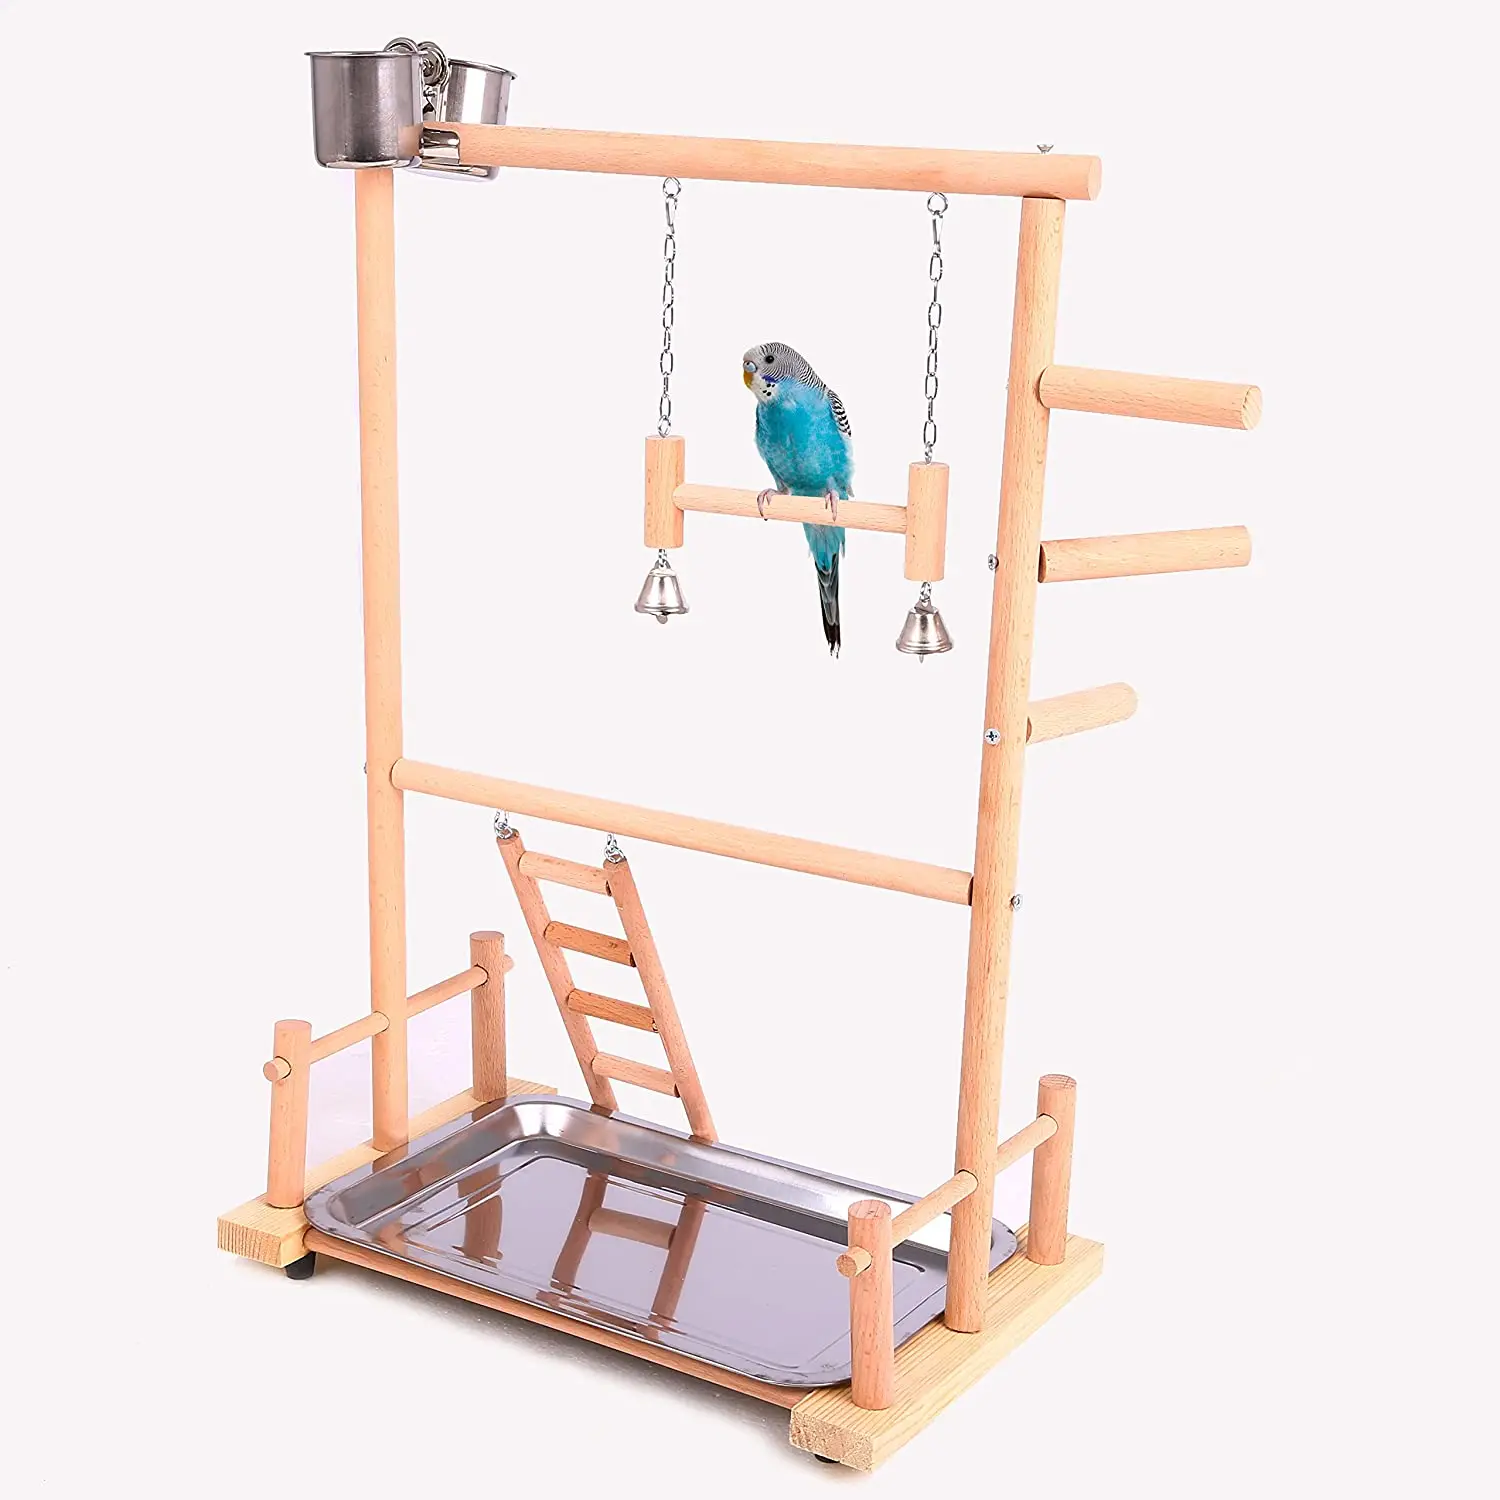 

Bird cage wooden handmade parrot playgym ceramic pet bowl for stand swing bridge wood climb ladders sole feeder, Customized color